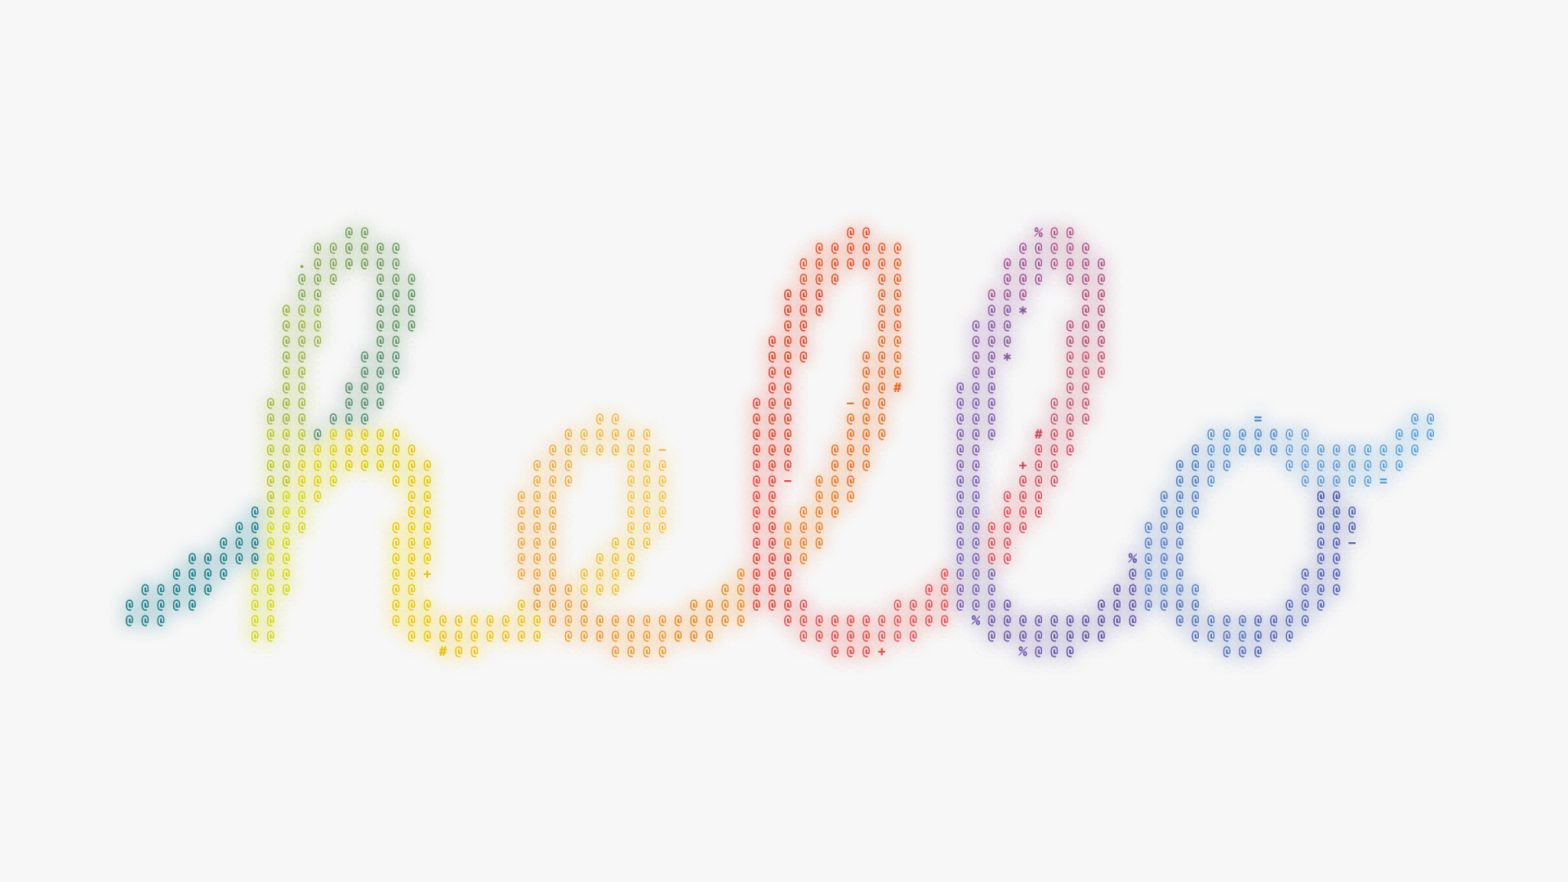 The word “Hello” in script in rainbow-color text and constructed out of small dots.